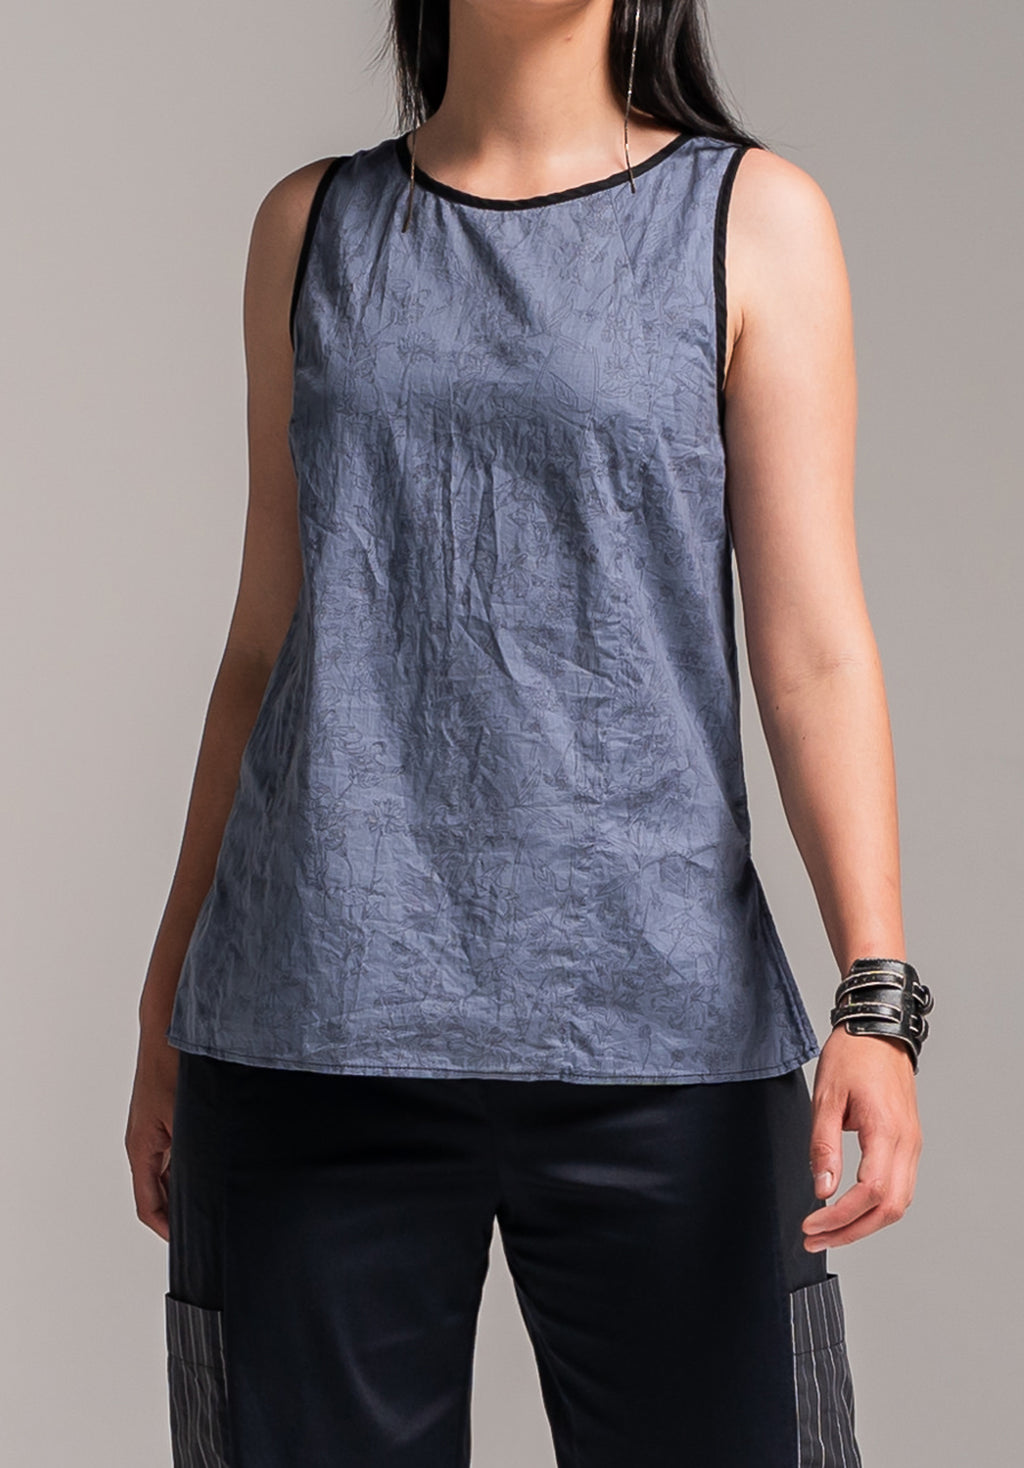 ethical clothing australia, printed cotton summer tops, summer tops boutique